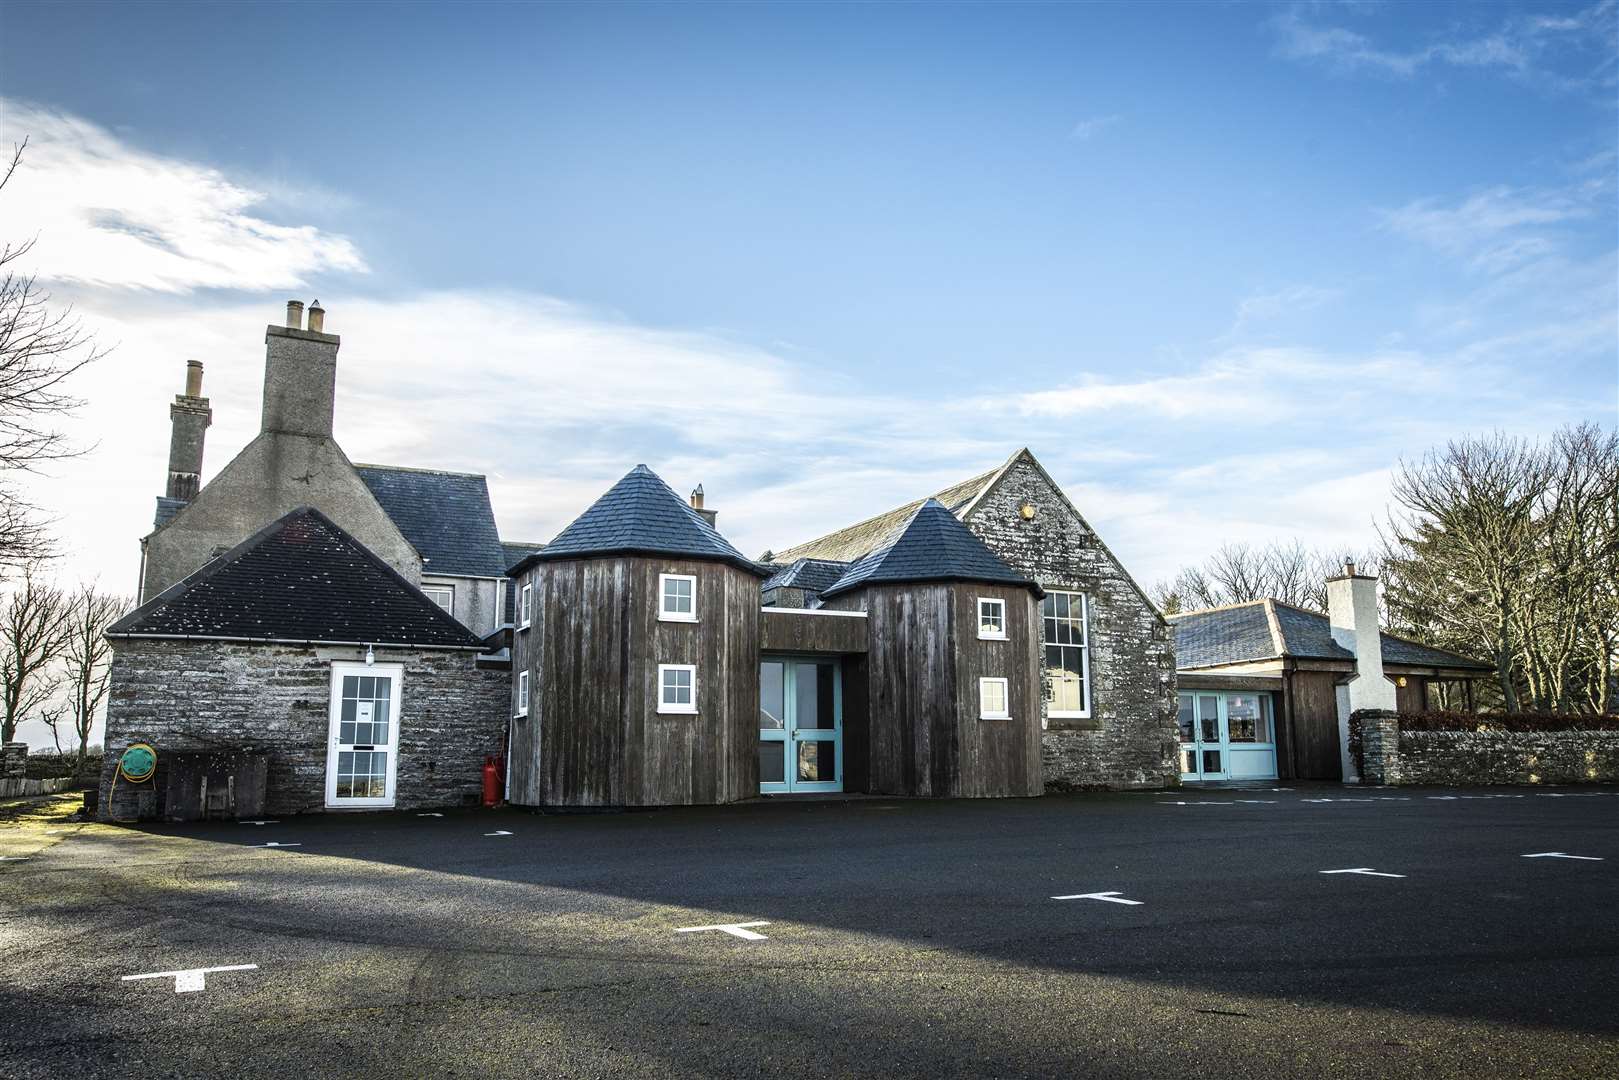 Lyth Arts Centre is working to enable a safe return for staff and visitors. Picture: SDM Photography